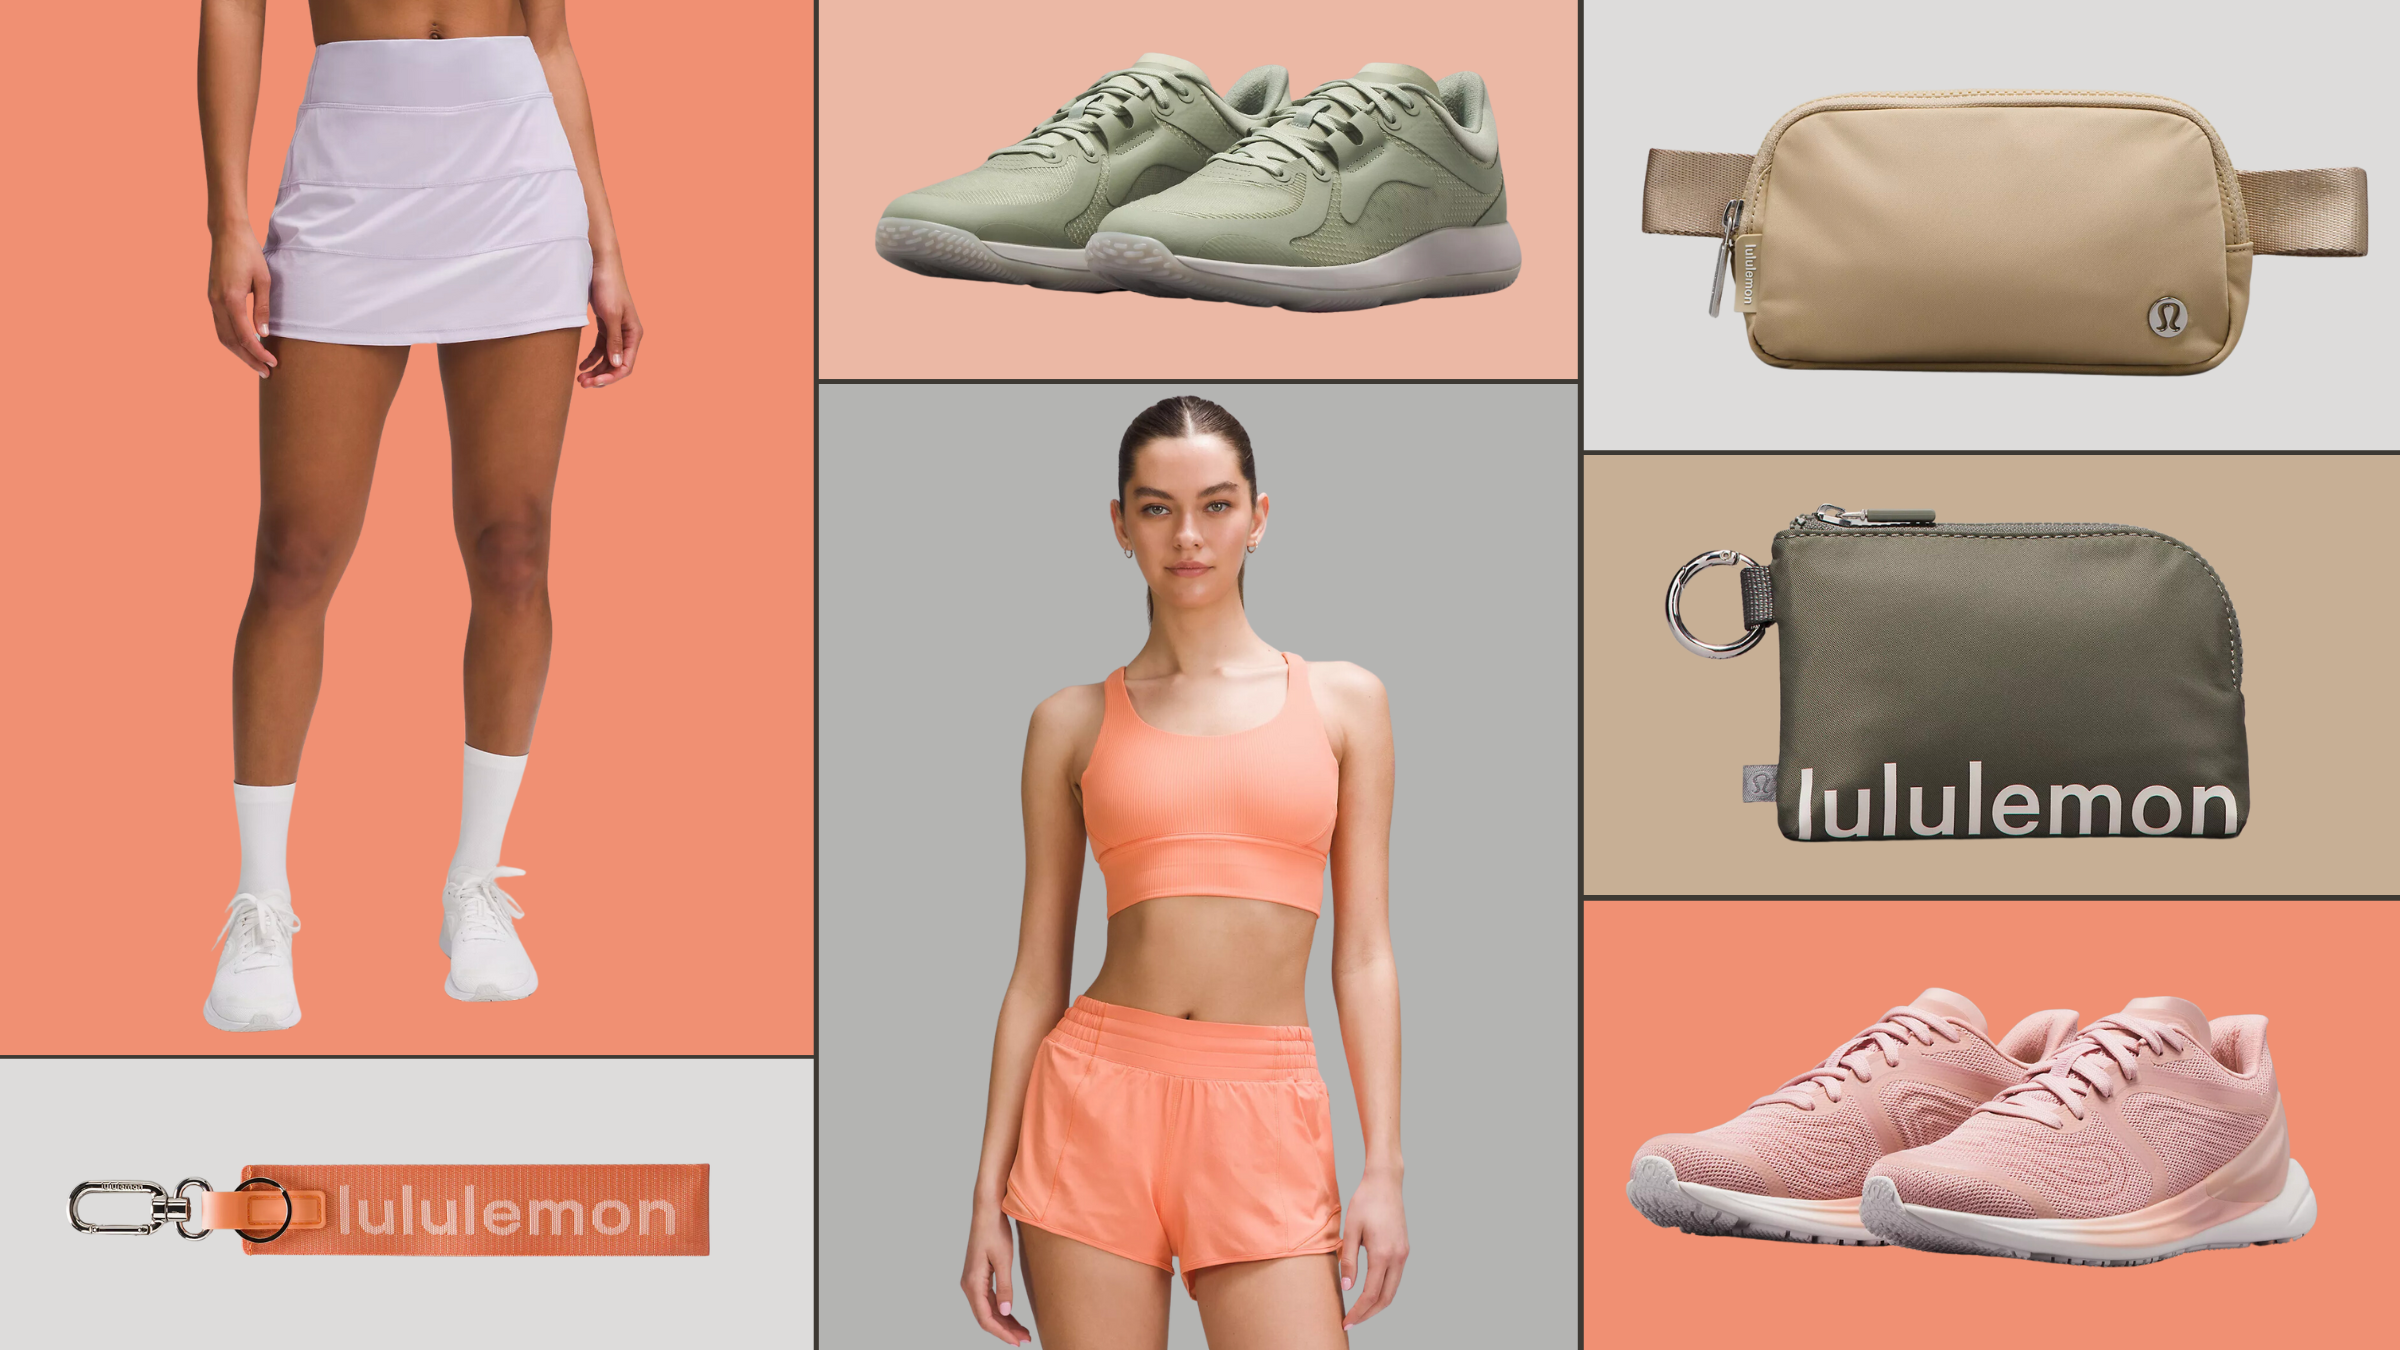 Lululemon's We Made Too Much page includes a ton of cute Mother's Day gift ideas